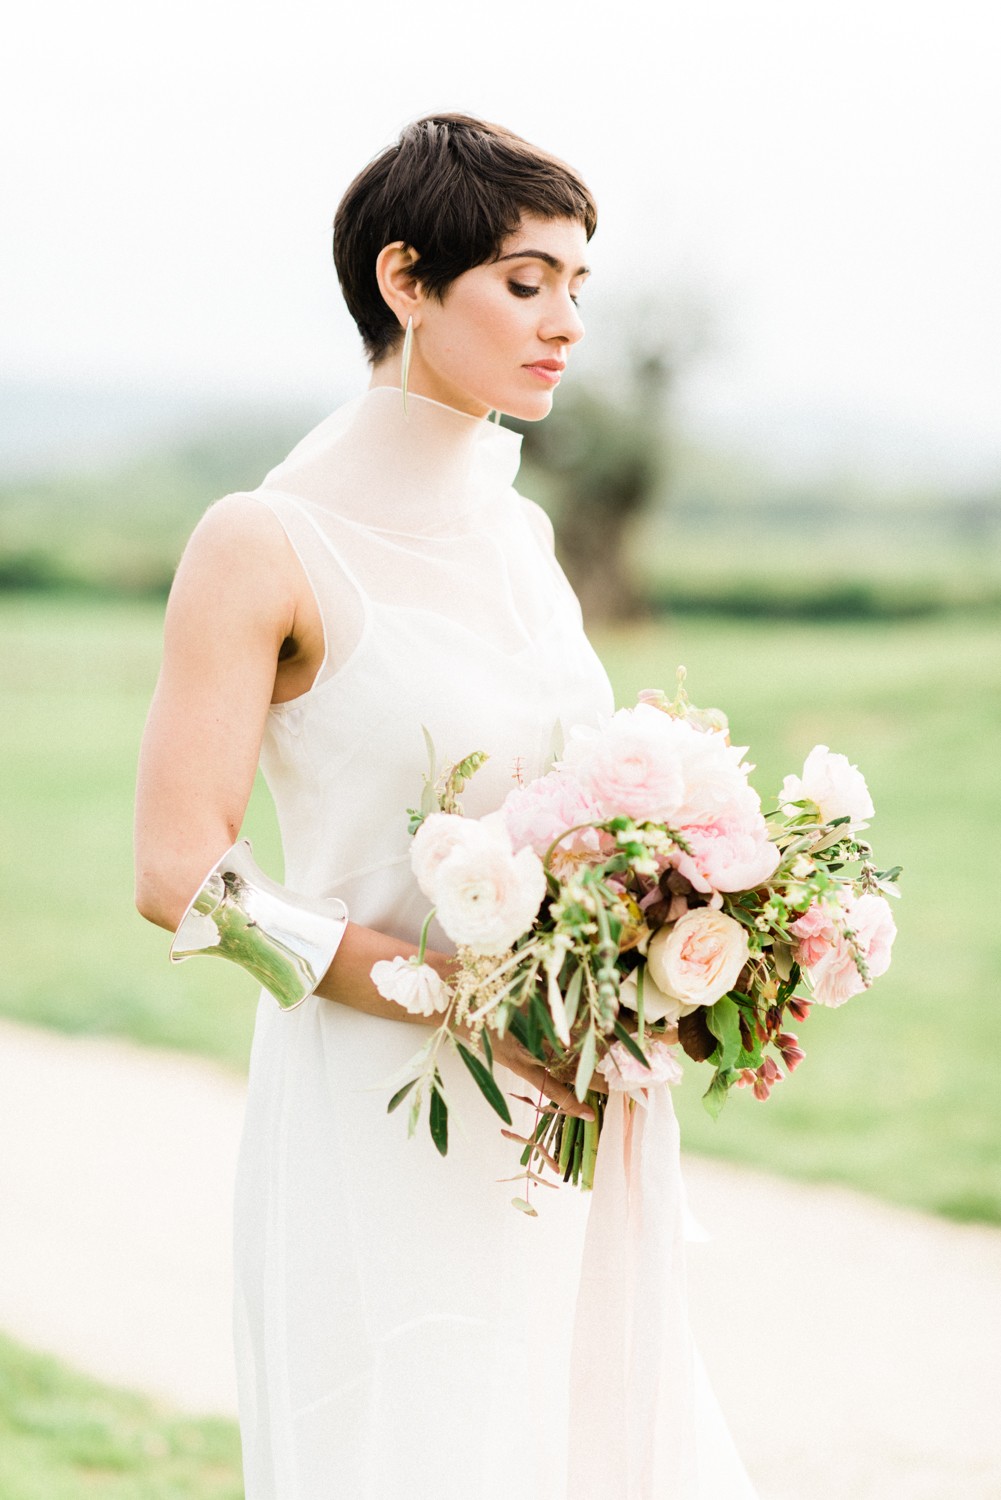 Short haired bride holding a bouquet of flowers